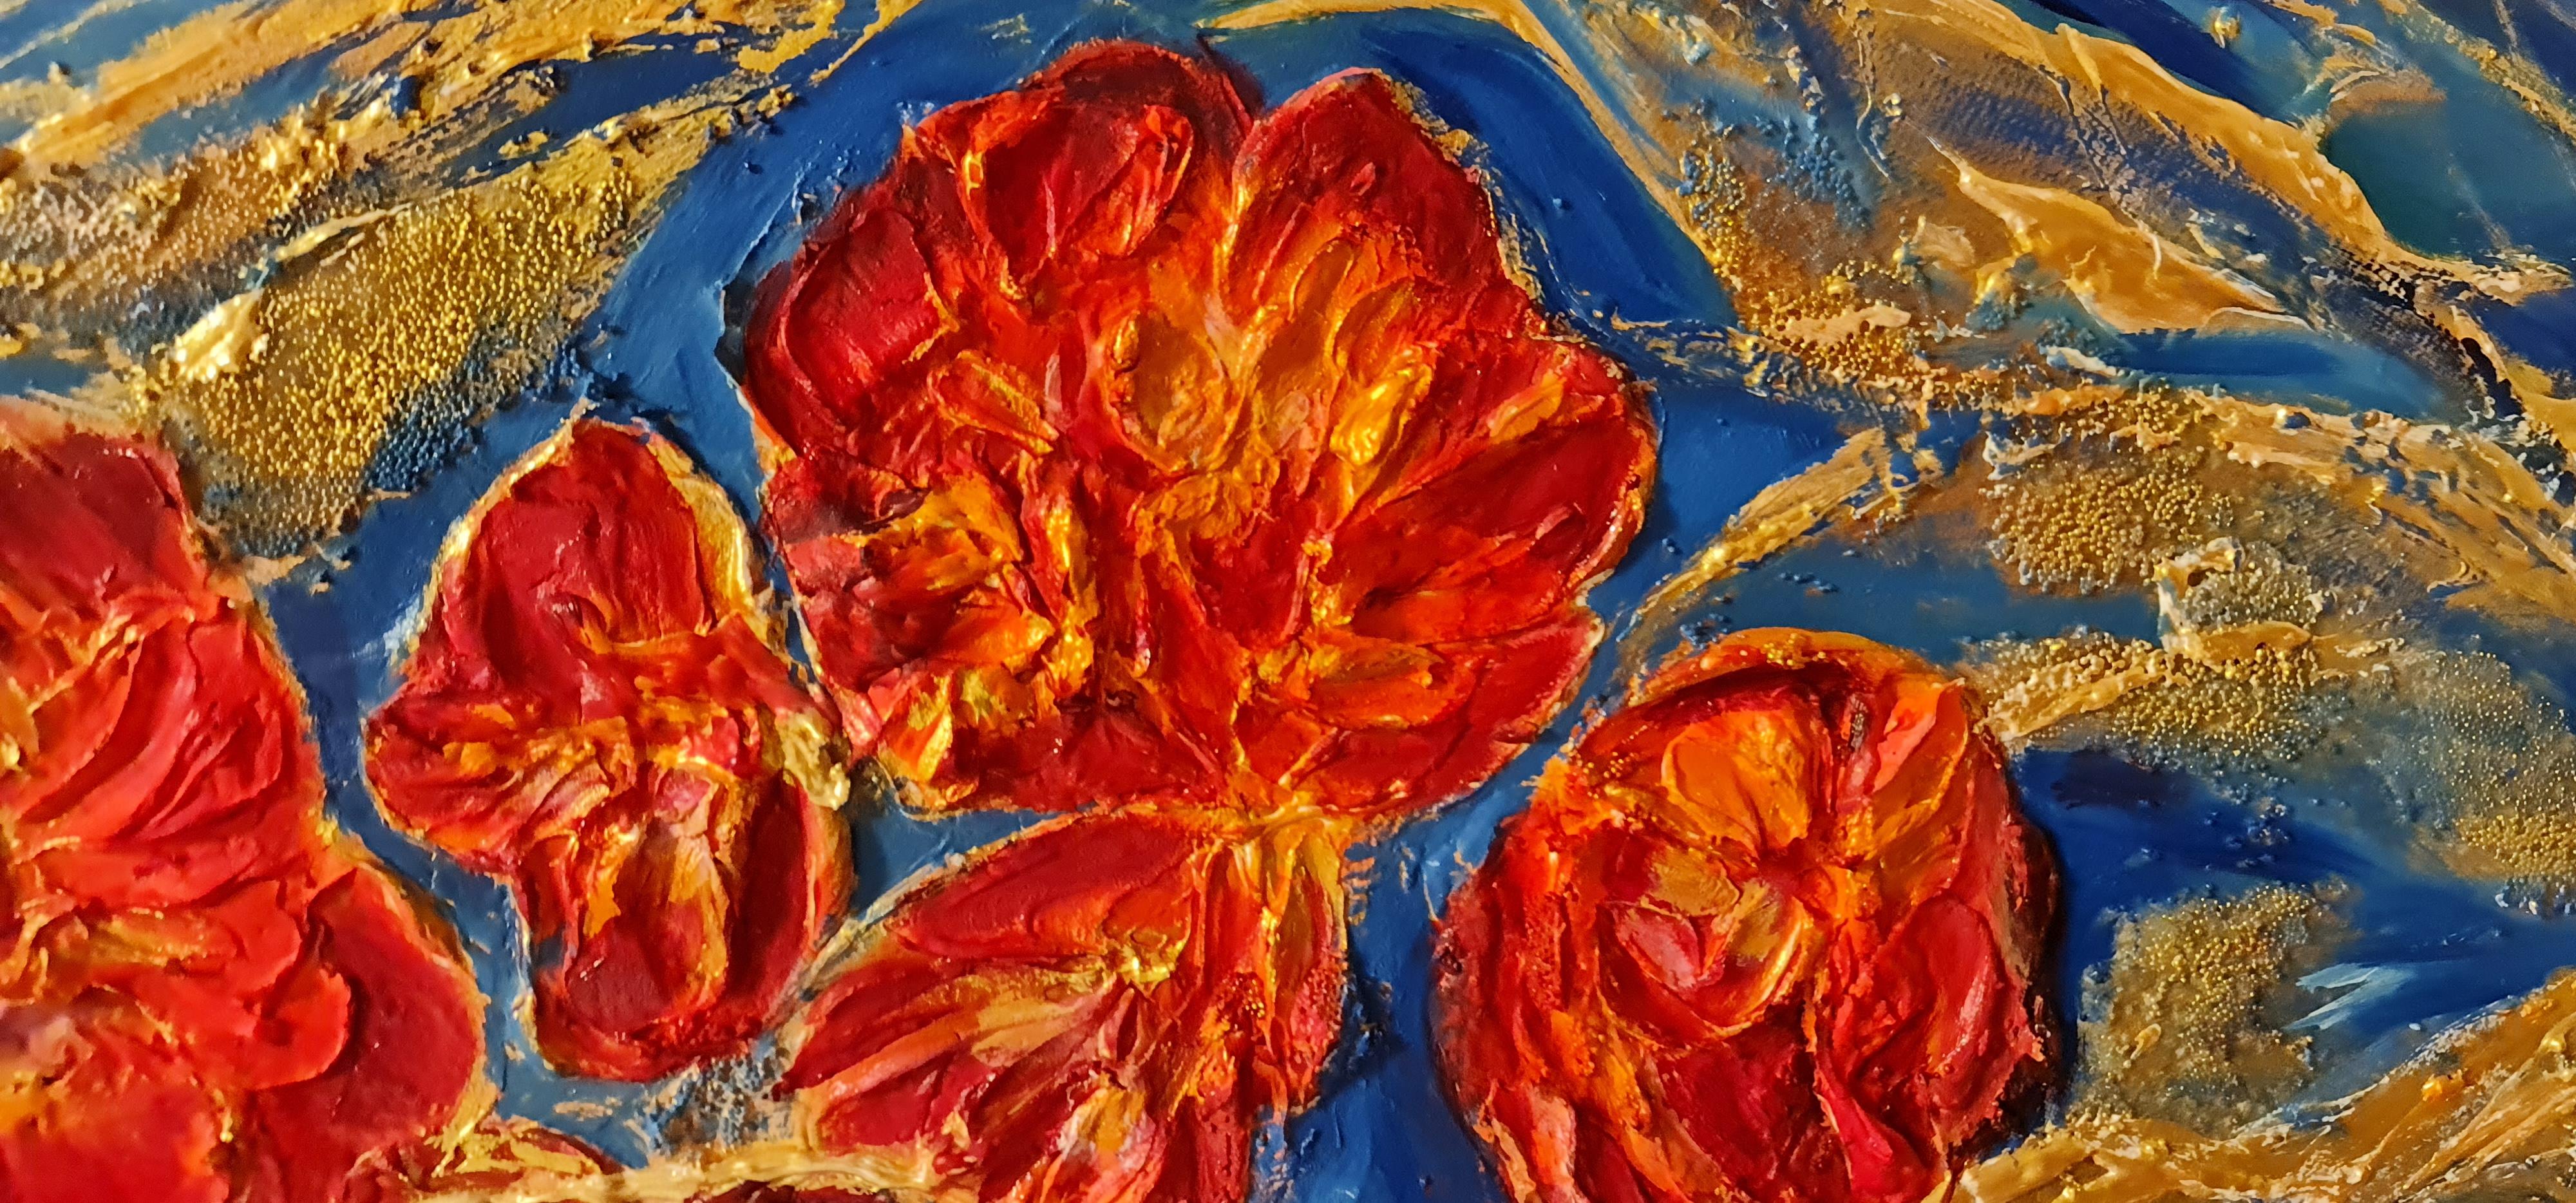 Still life of scarlet, orange flowers on a blue background. An interesting composition. The canvas space is completely filled with flowers. But!There is air in the gaps. This makes the painting more refined. The combination of orange and blue is a